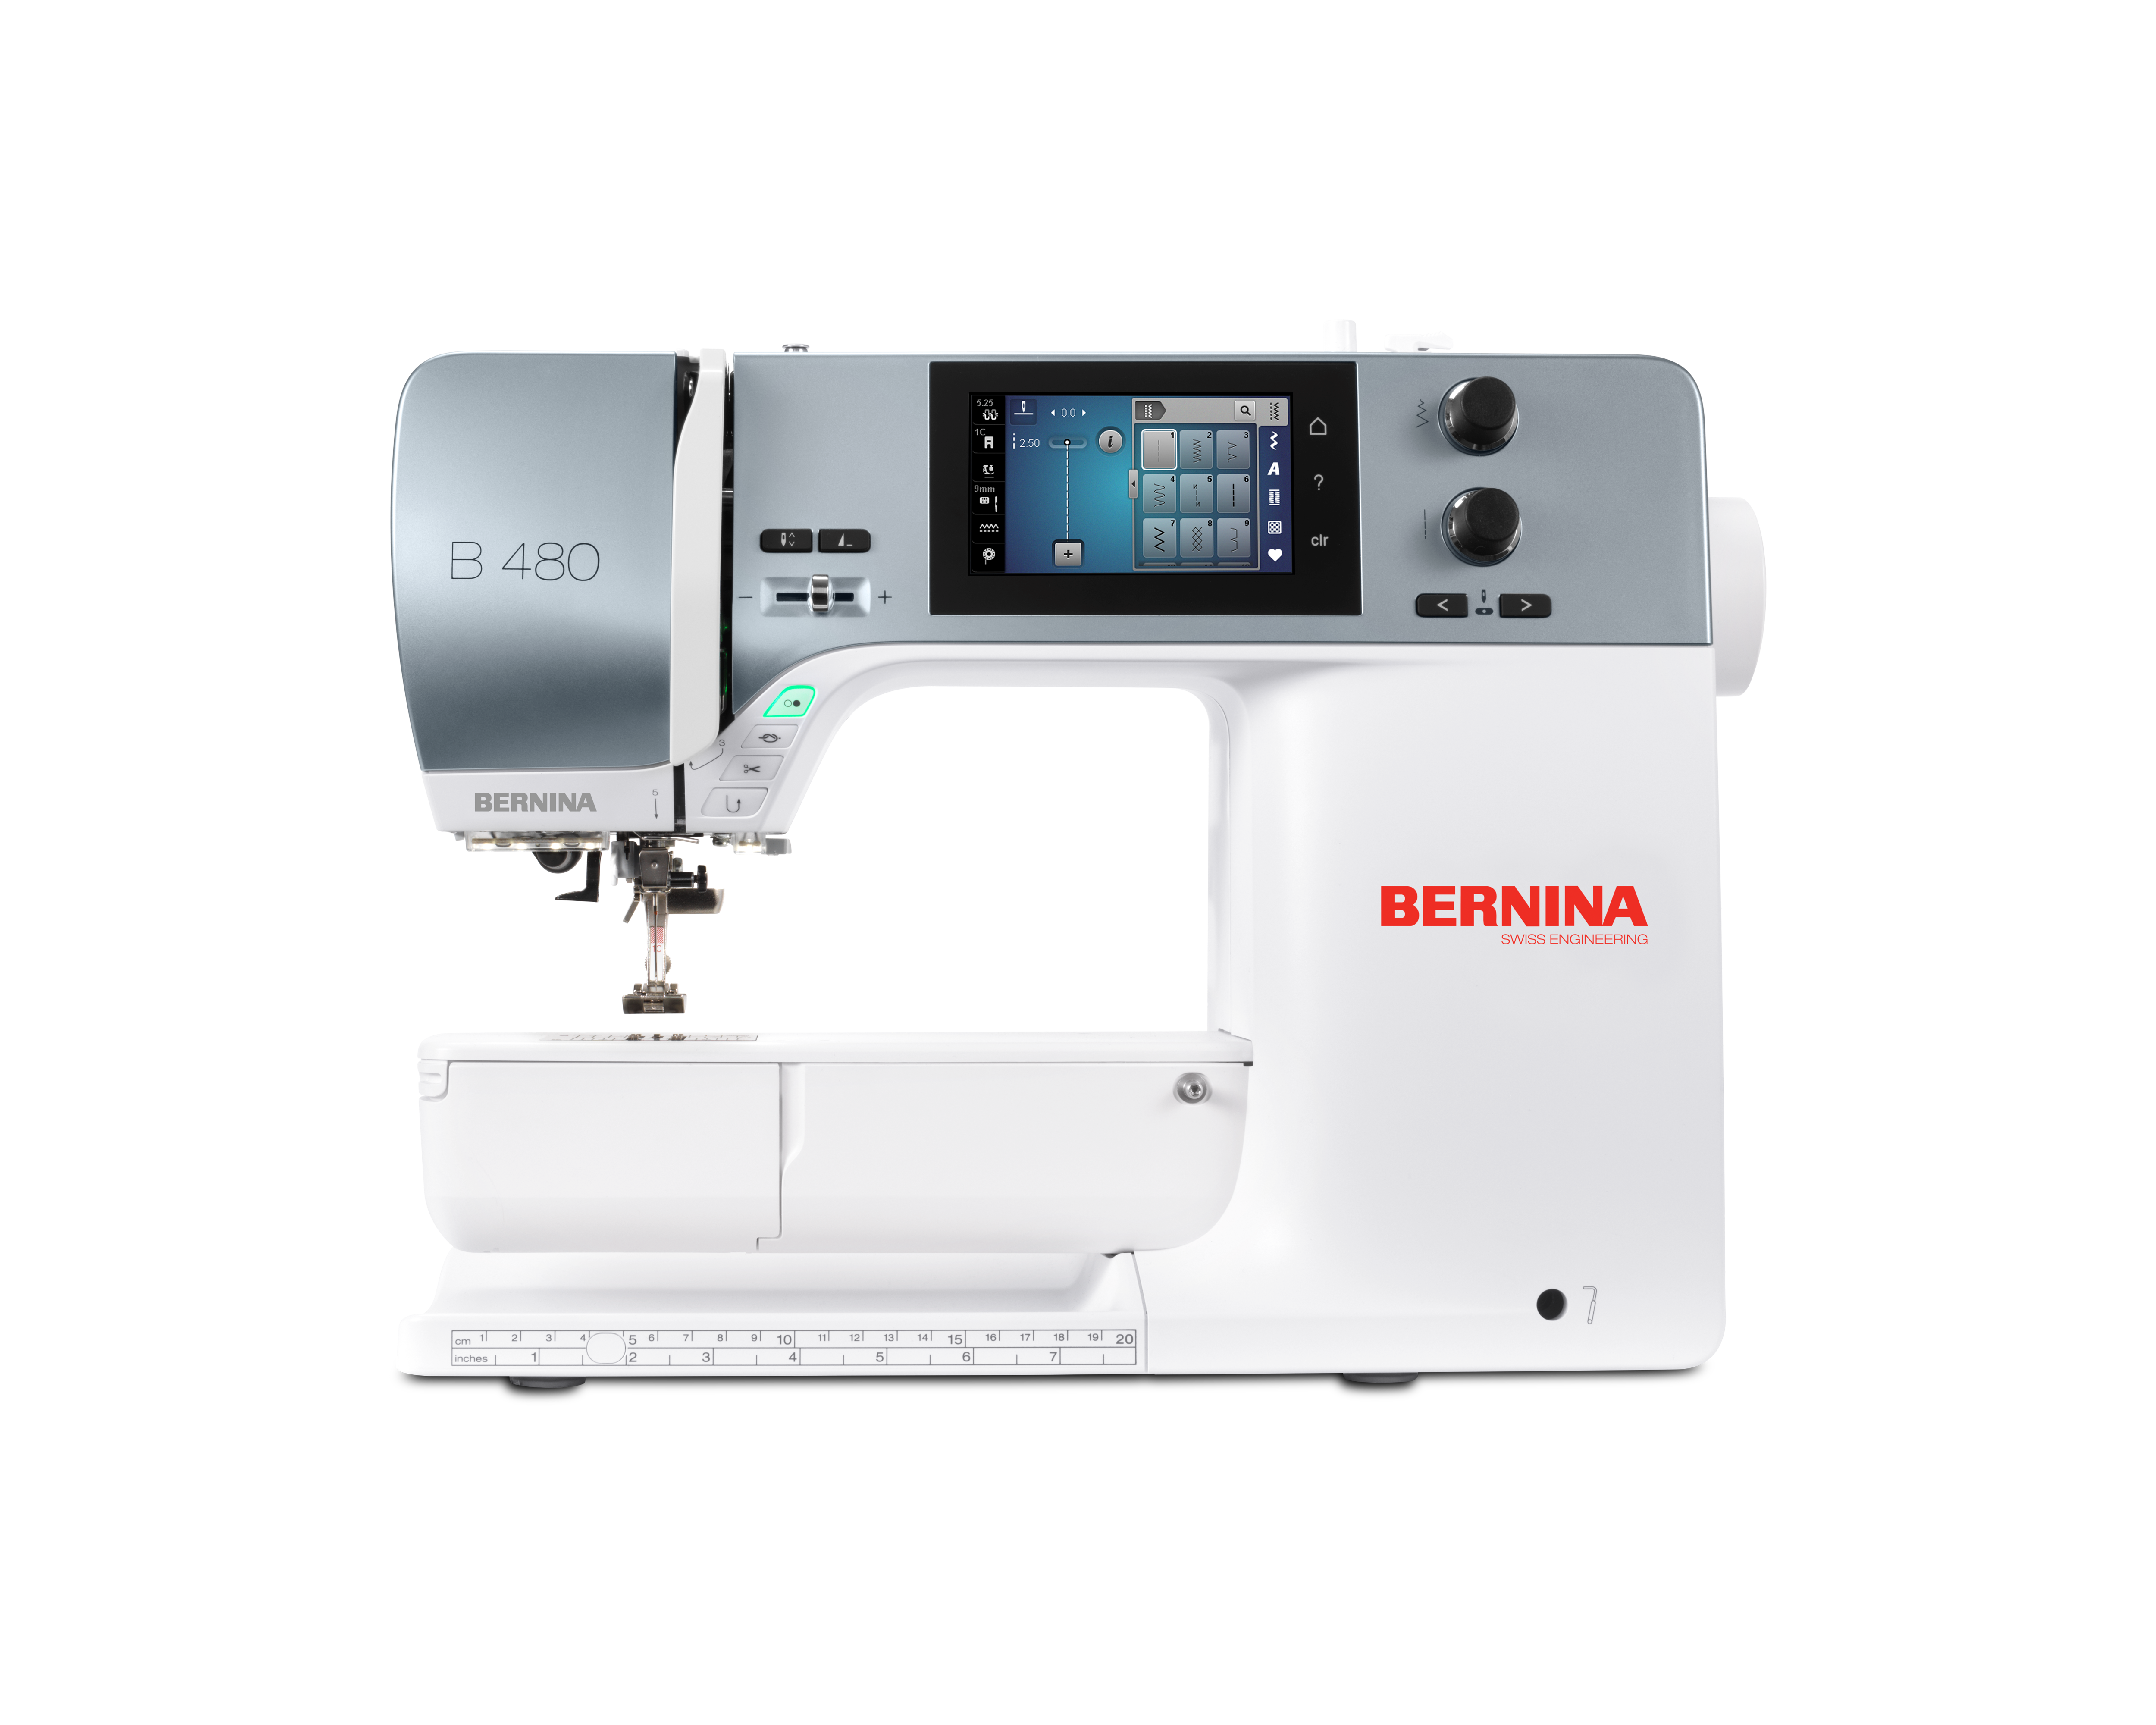 front facing image of the BERNINA 480 Sewing Machine